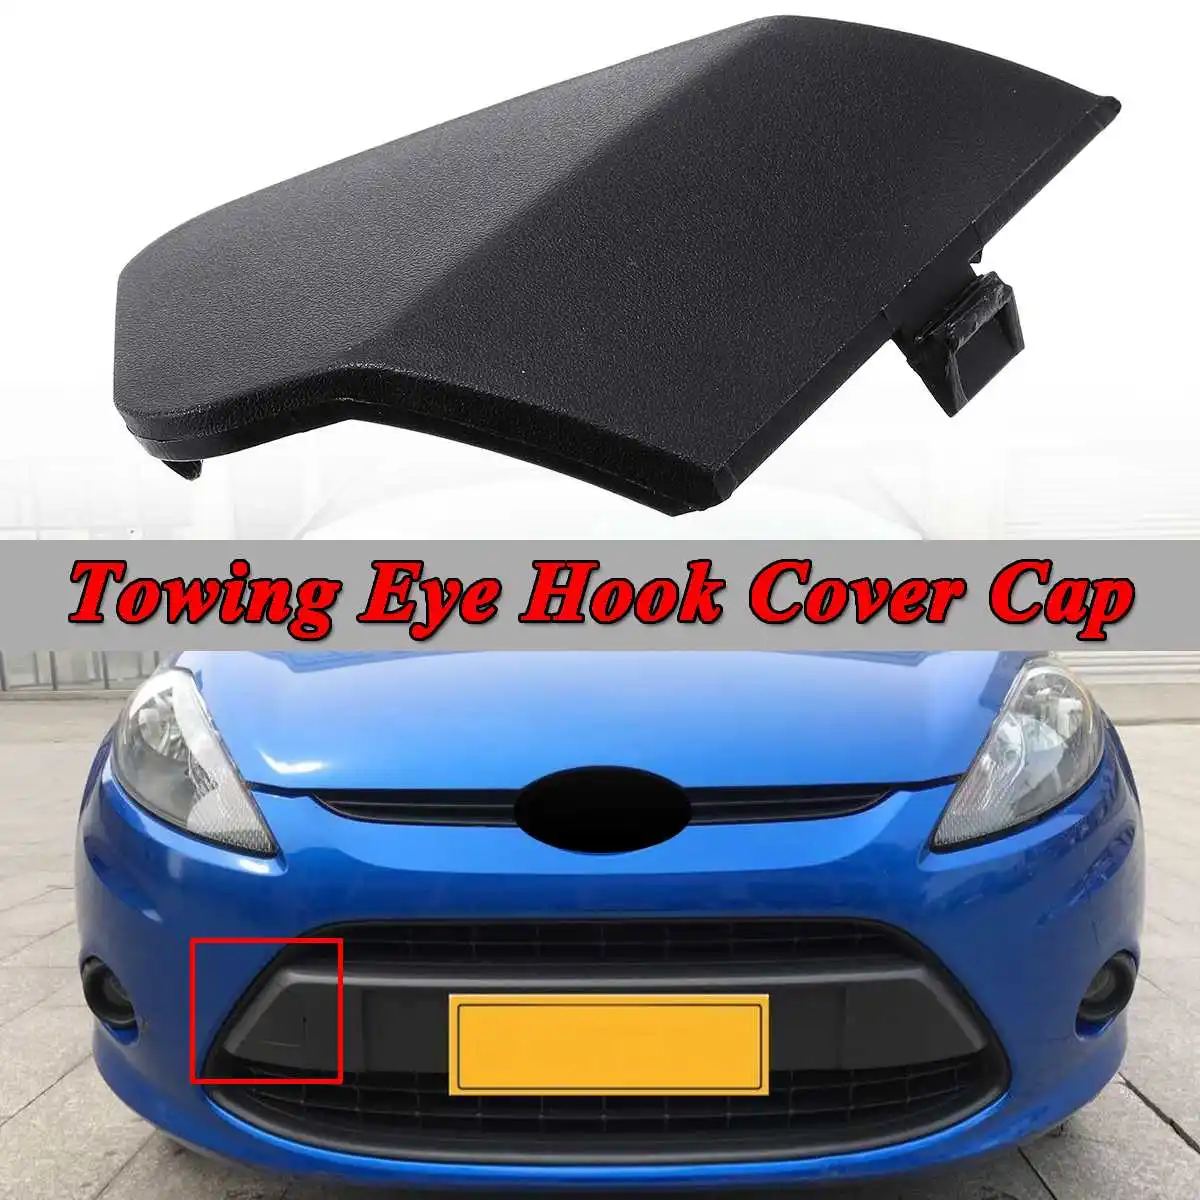 Cikuso Front Bumper Towing Trailer Cover Cap For Ford Fiesta Mk6 2001-2005